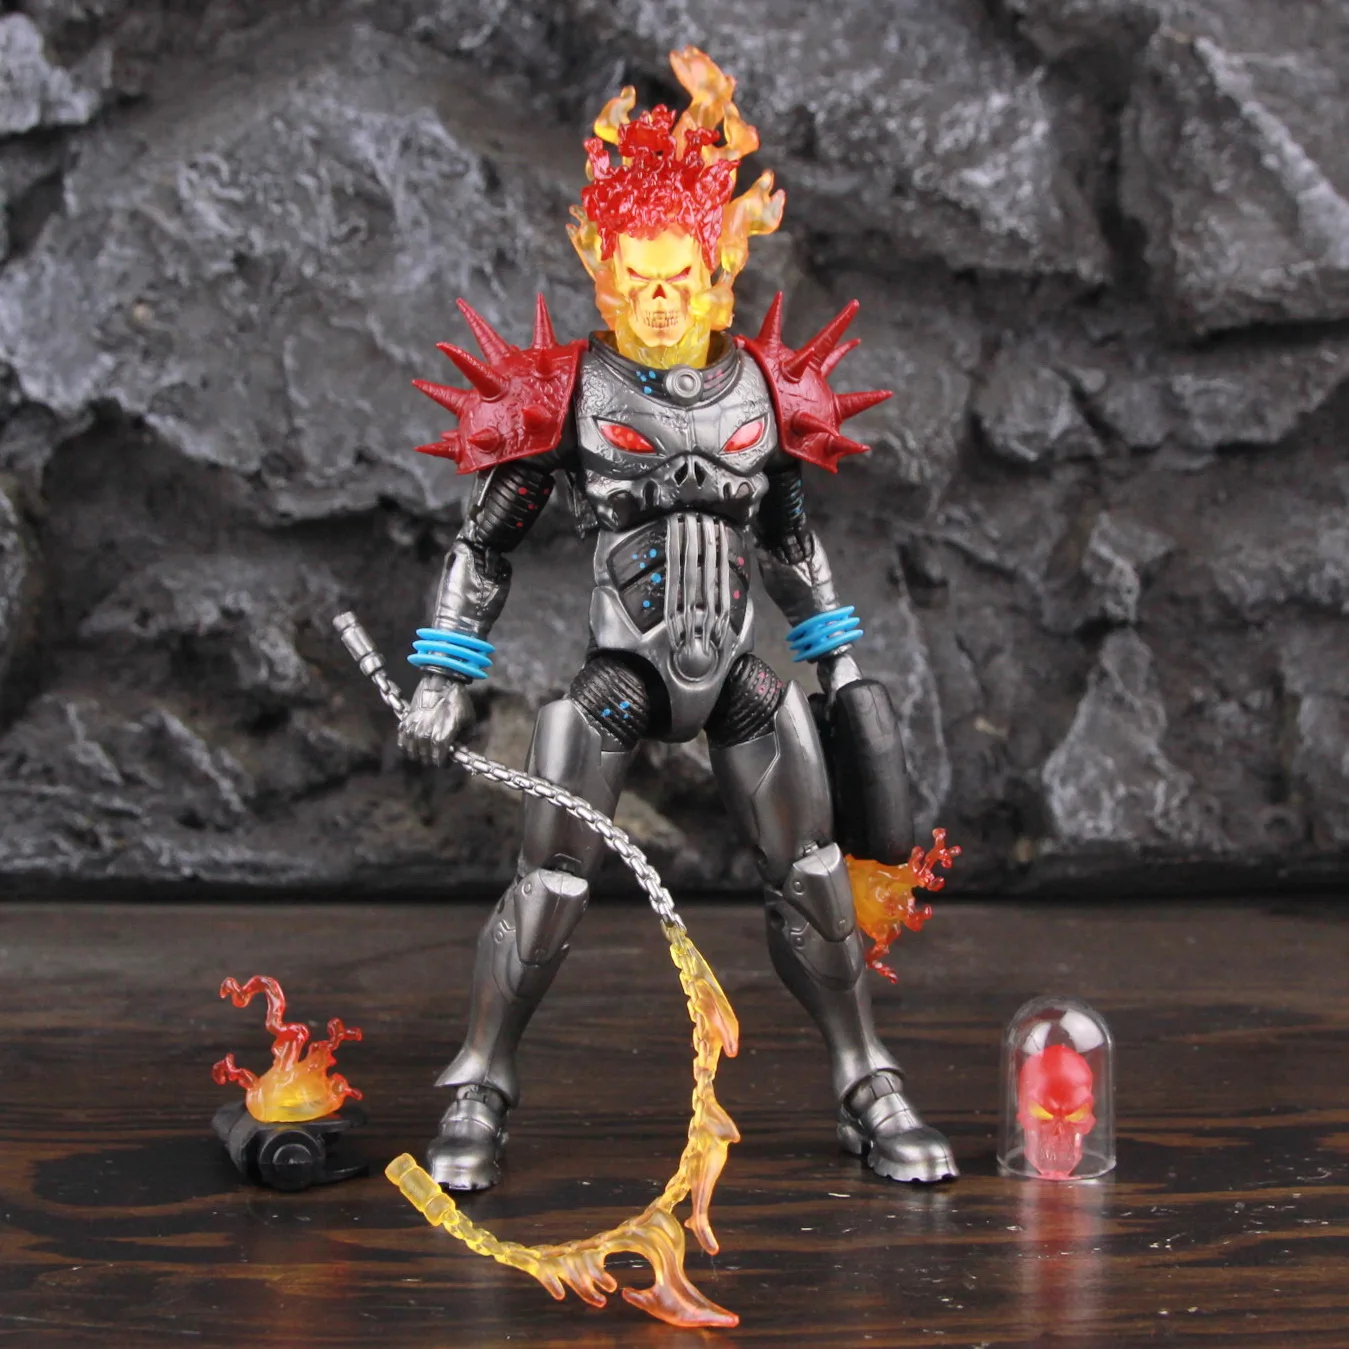 Marvel Legends Cosmic Ghost Rider 6" Action Figure Fire Whip Without Motorbike From Vehicle Set Riders Series Toys